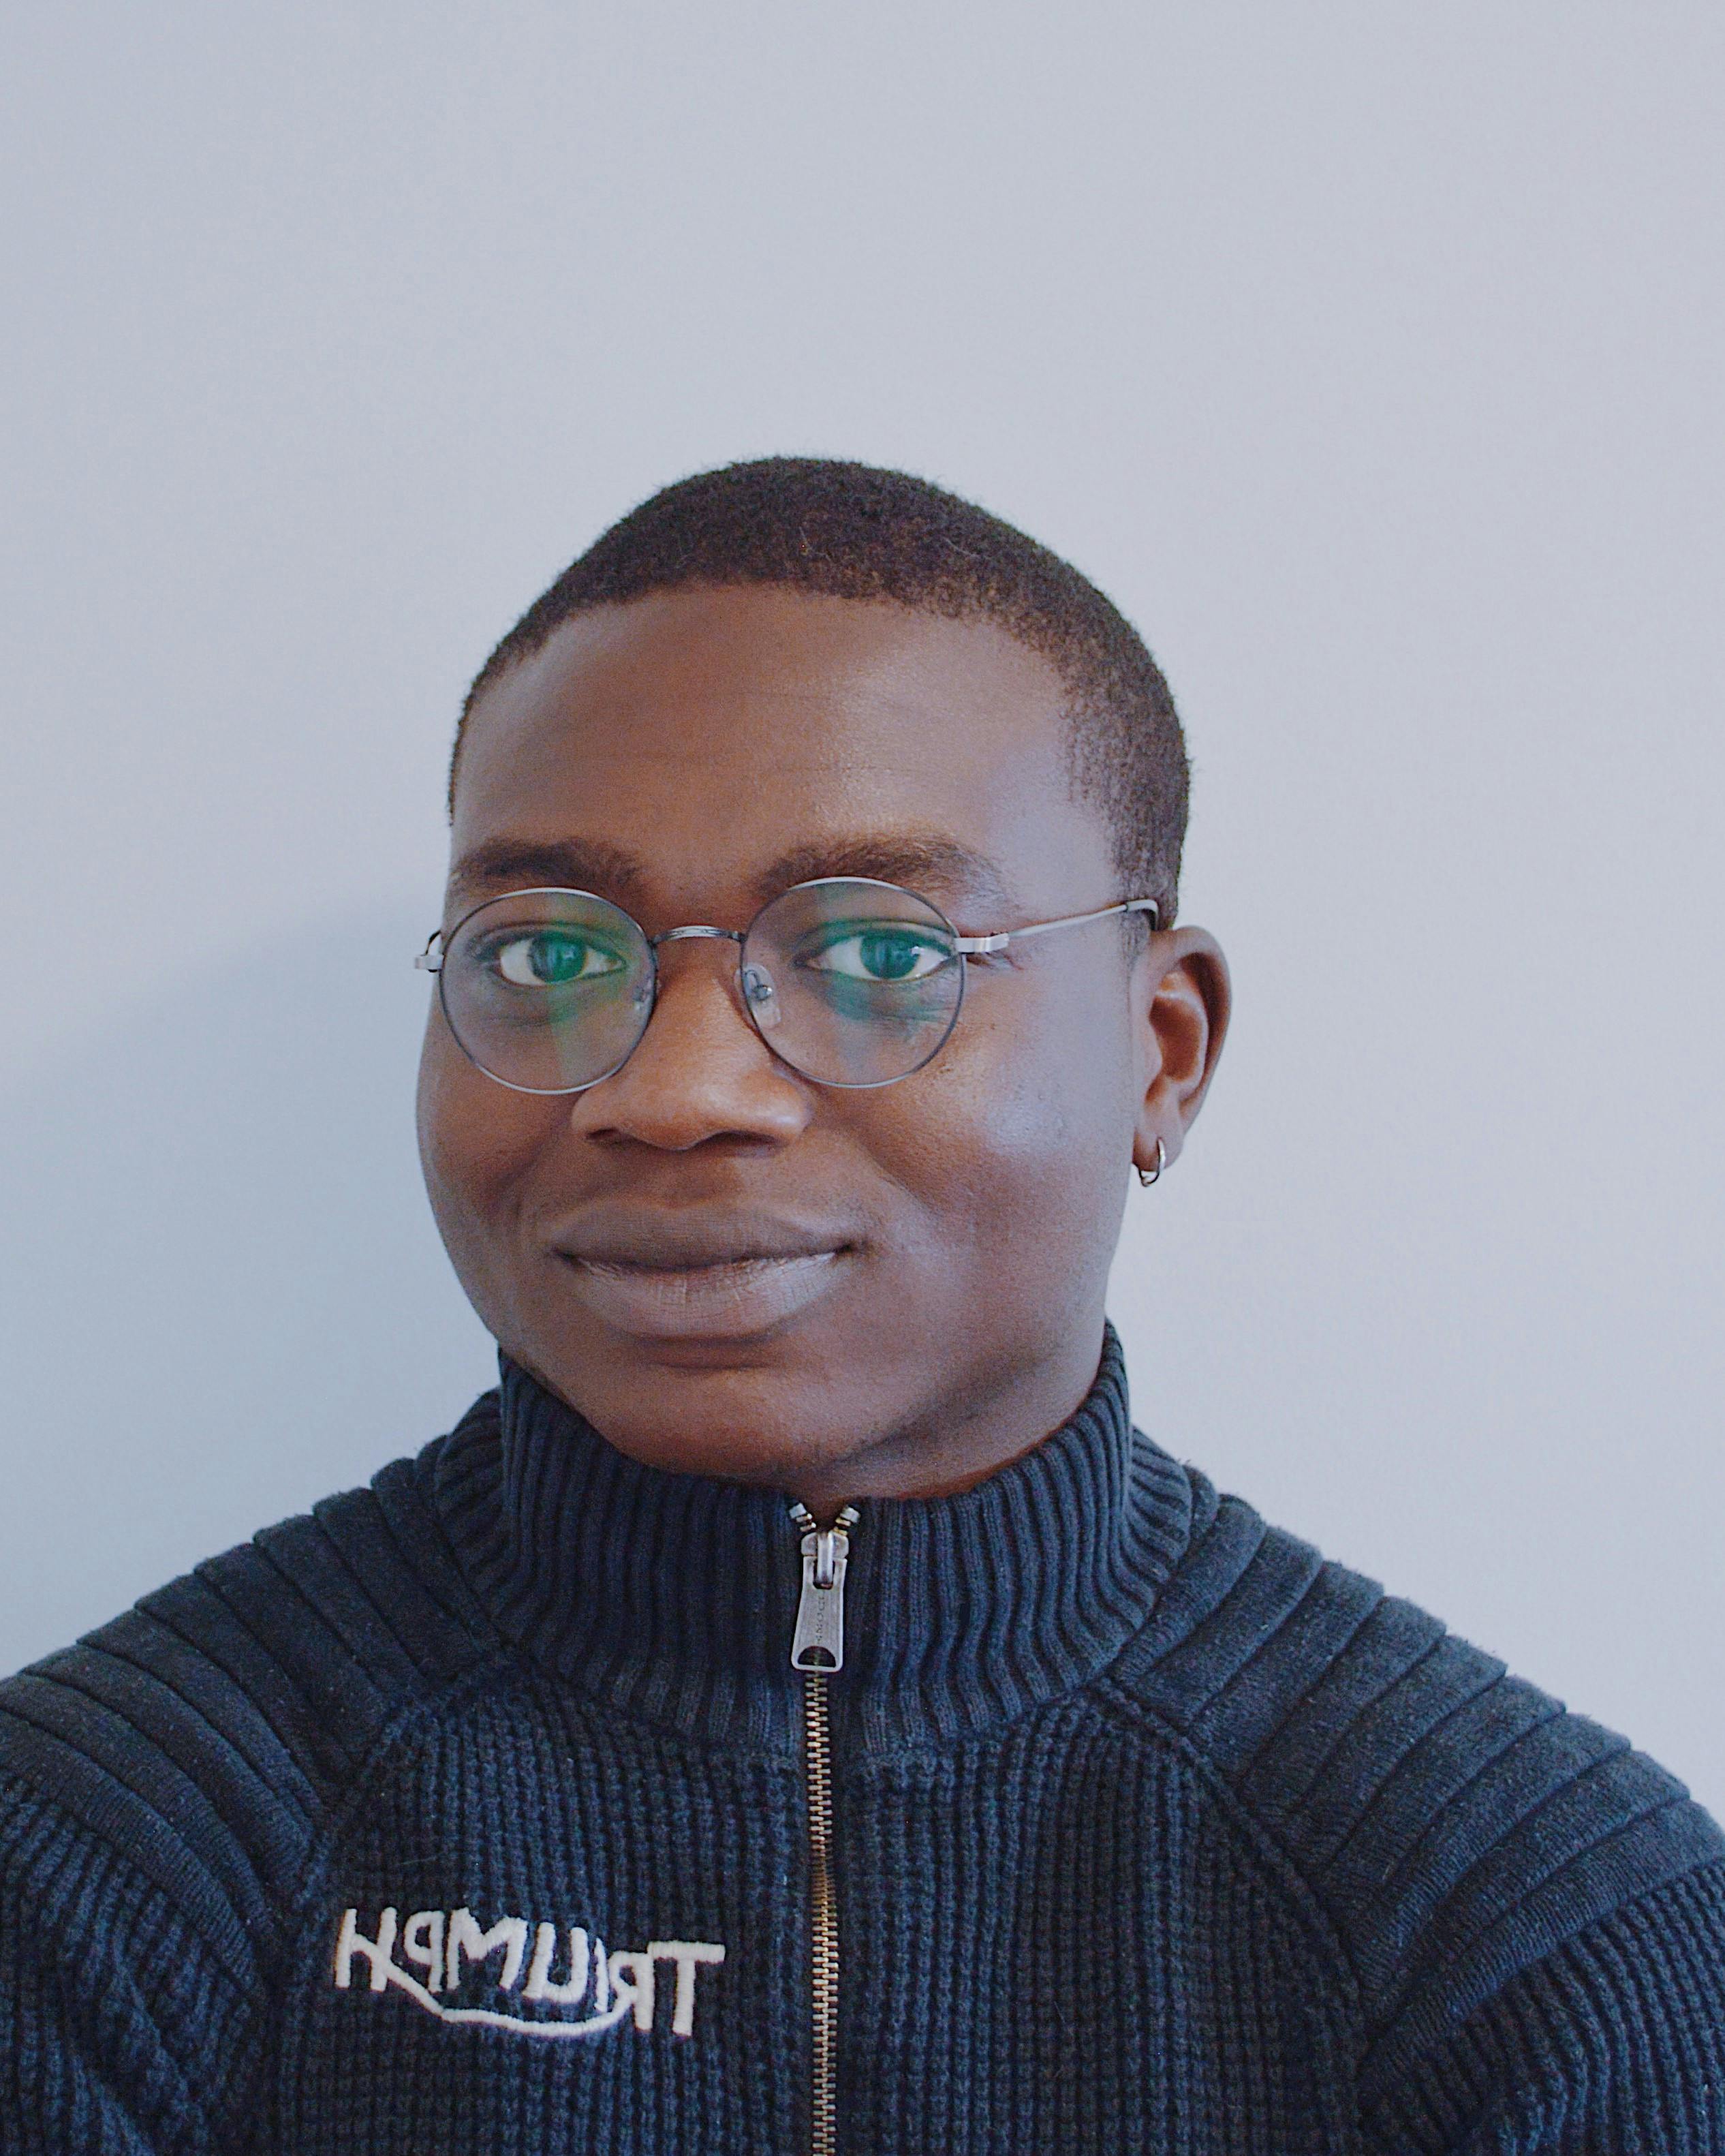 headshot of Mide Kadiri. Mide has black skin, short black hair, and dark brown eyes. He has an earring in his left ear and is wearing glasses. He's wearing a navy-blue turtleneck with a zipper in the front